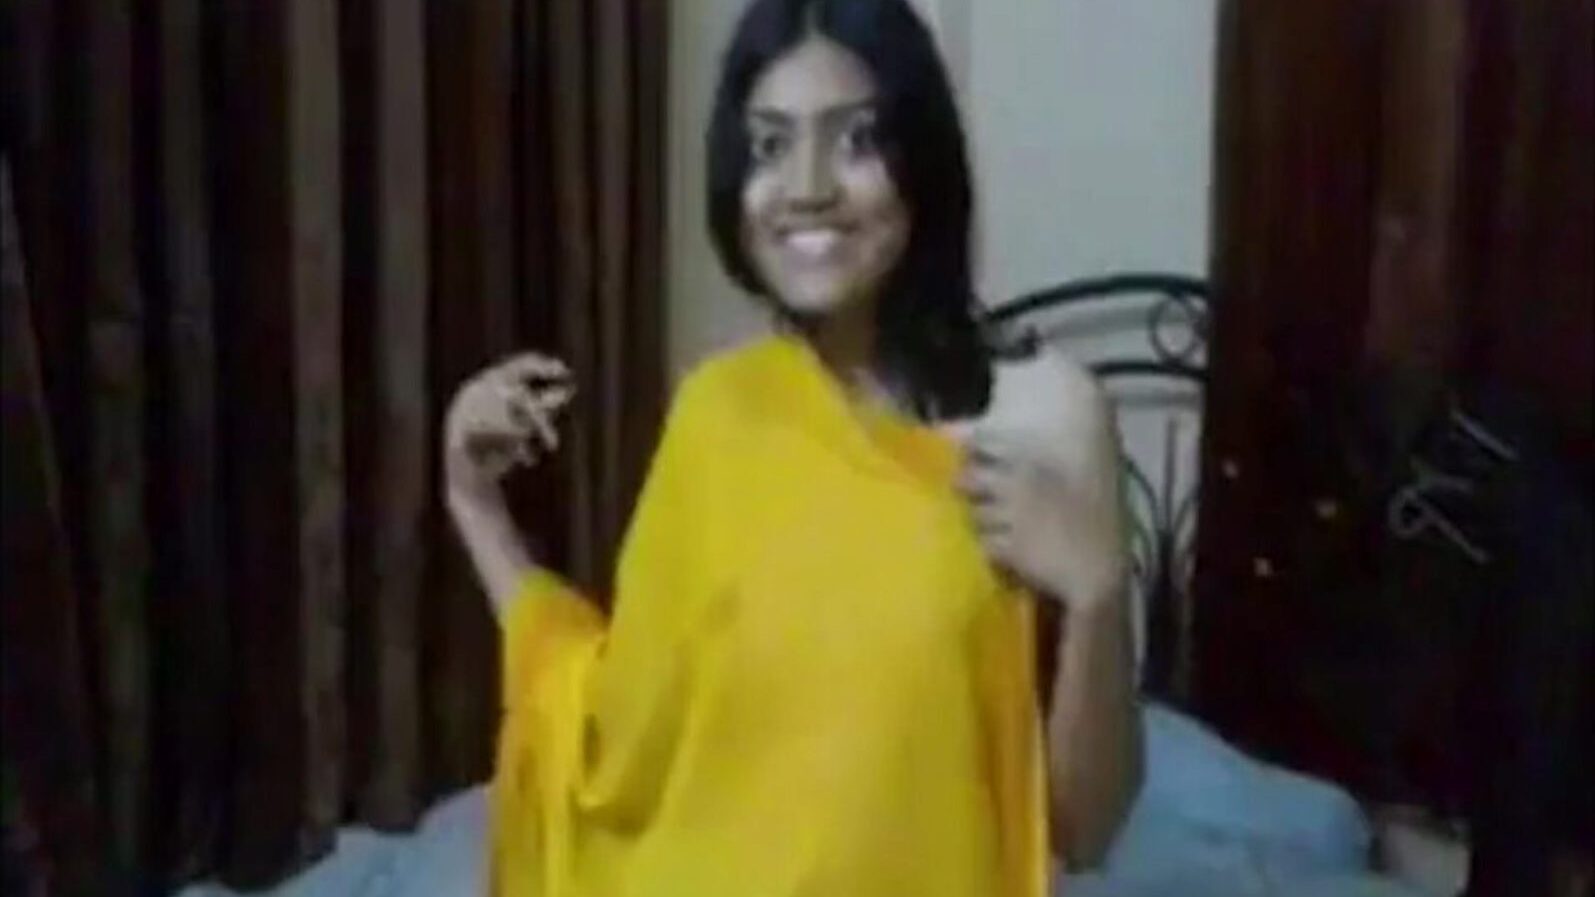 indian college girl fuck by stepbrother, porn 0c: xhamster watch indian indian girl girl fuck by stepbrother episode on xhamster, the enorm hd hdfuck tube site web with tonnes of free-for-all asian fuck online & blowjob porno movies scene